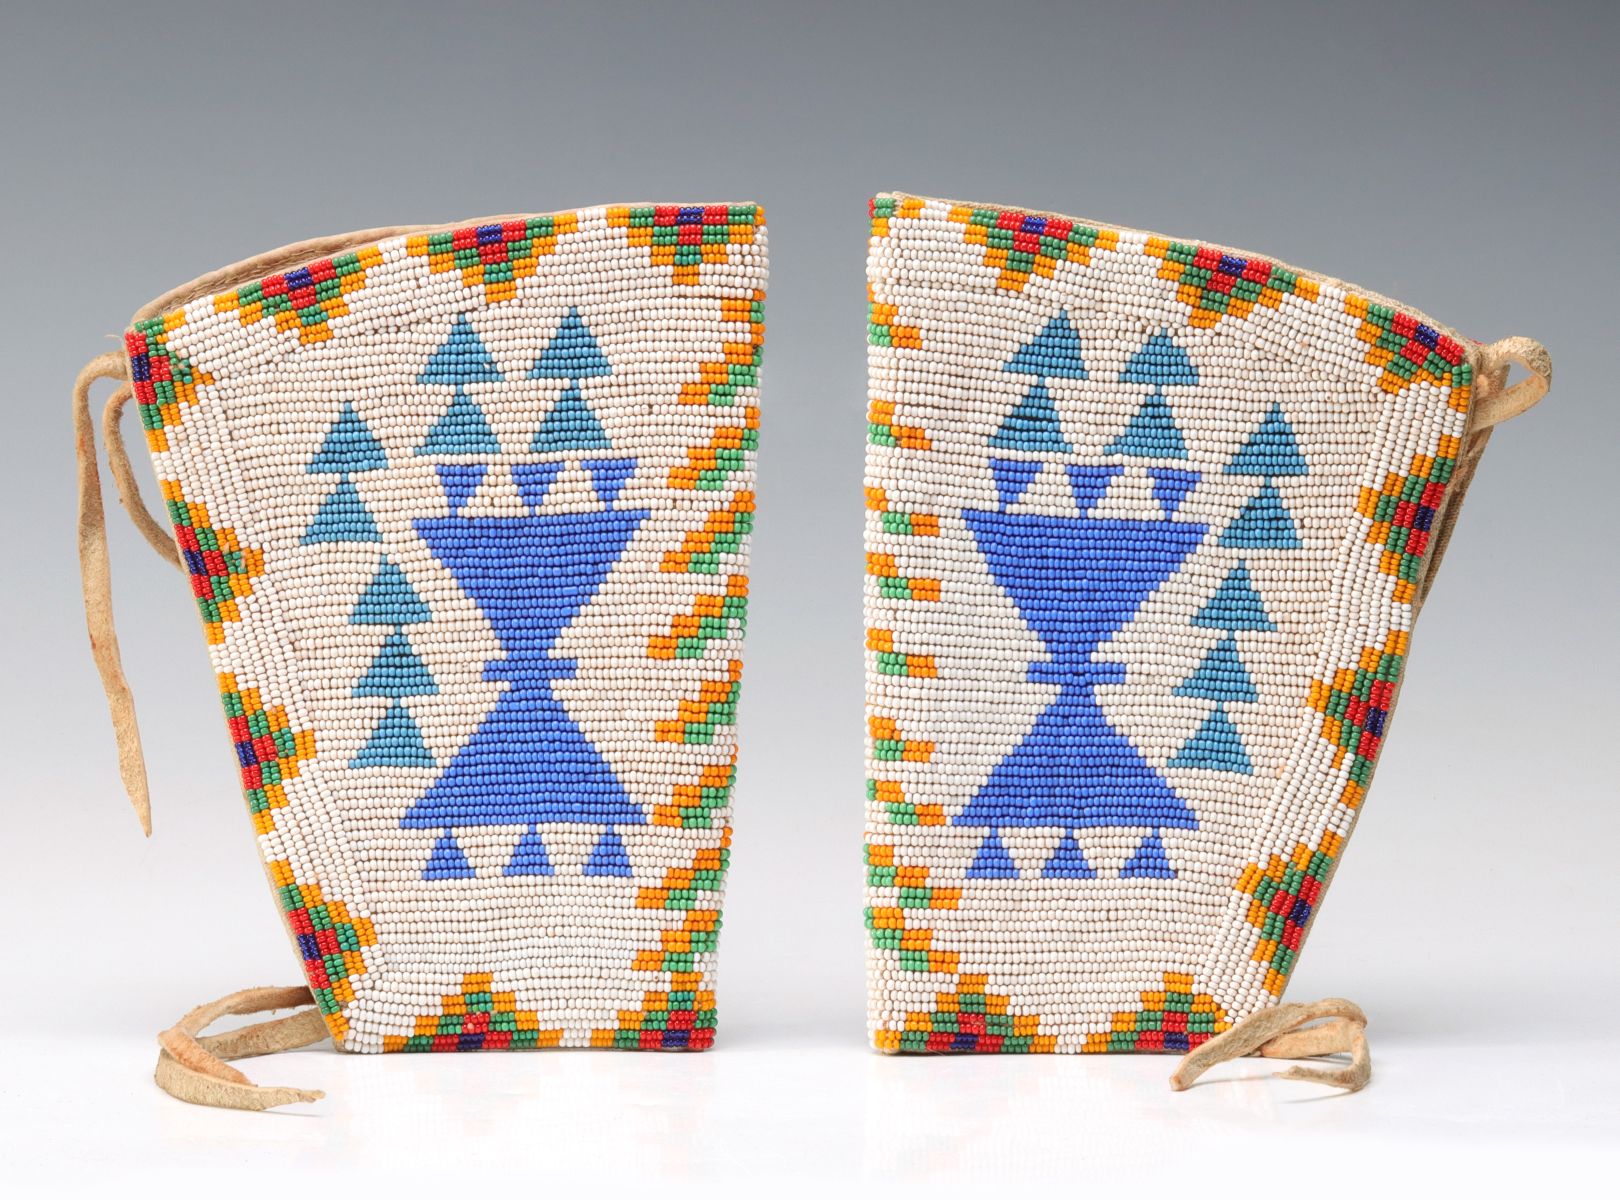 A PAIR OF PLAINS BEADED GAUNTLETS CIRCA 1930